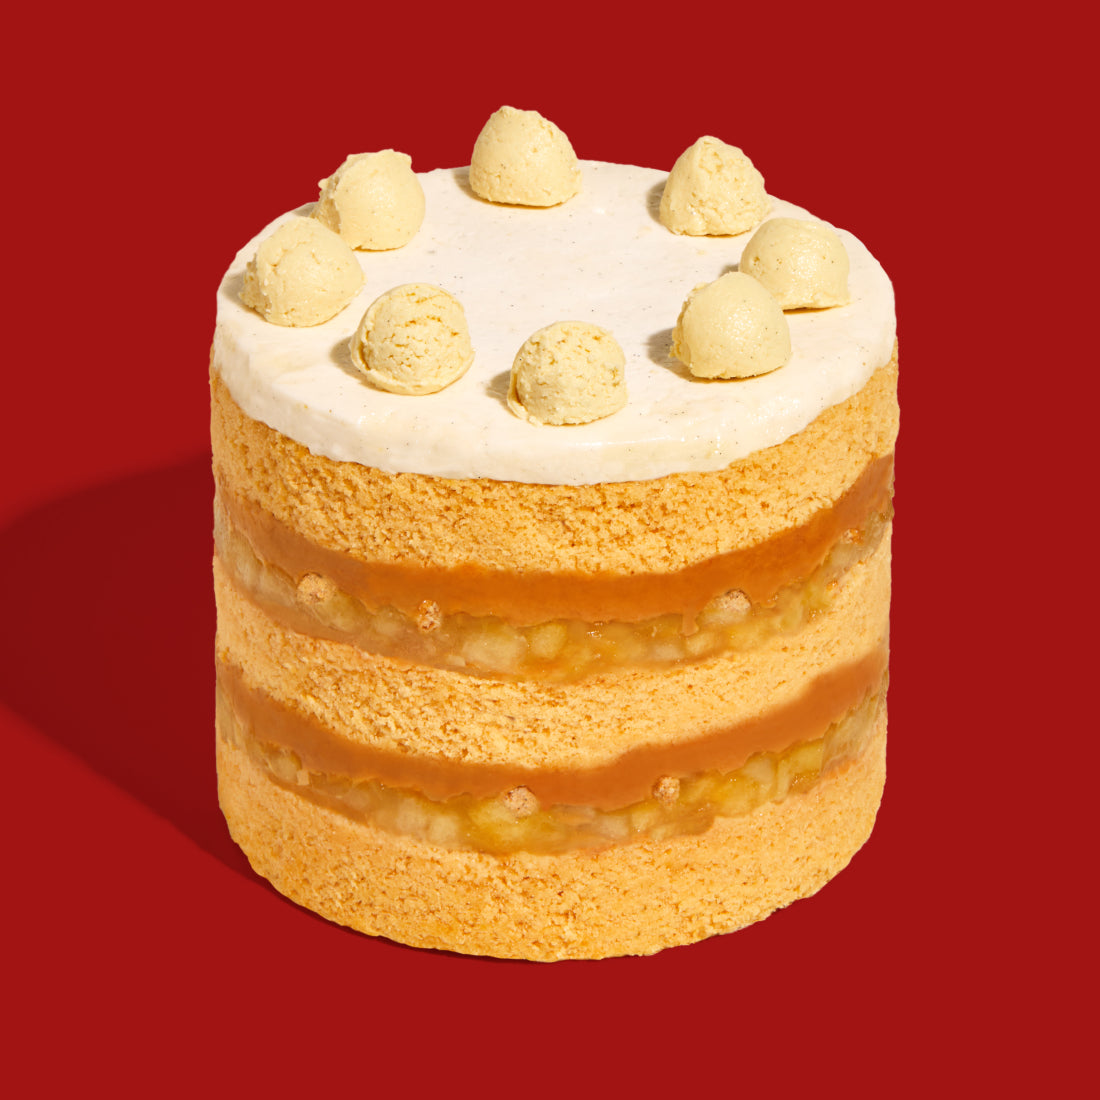 The limited-edition Caramel Apple Pie Cake.